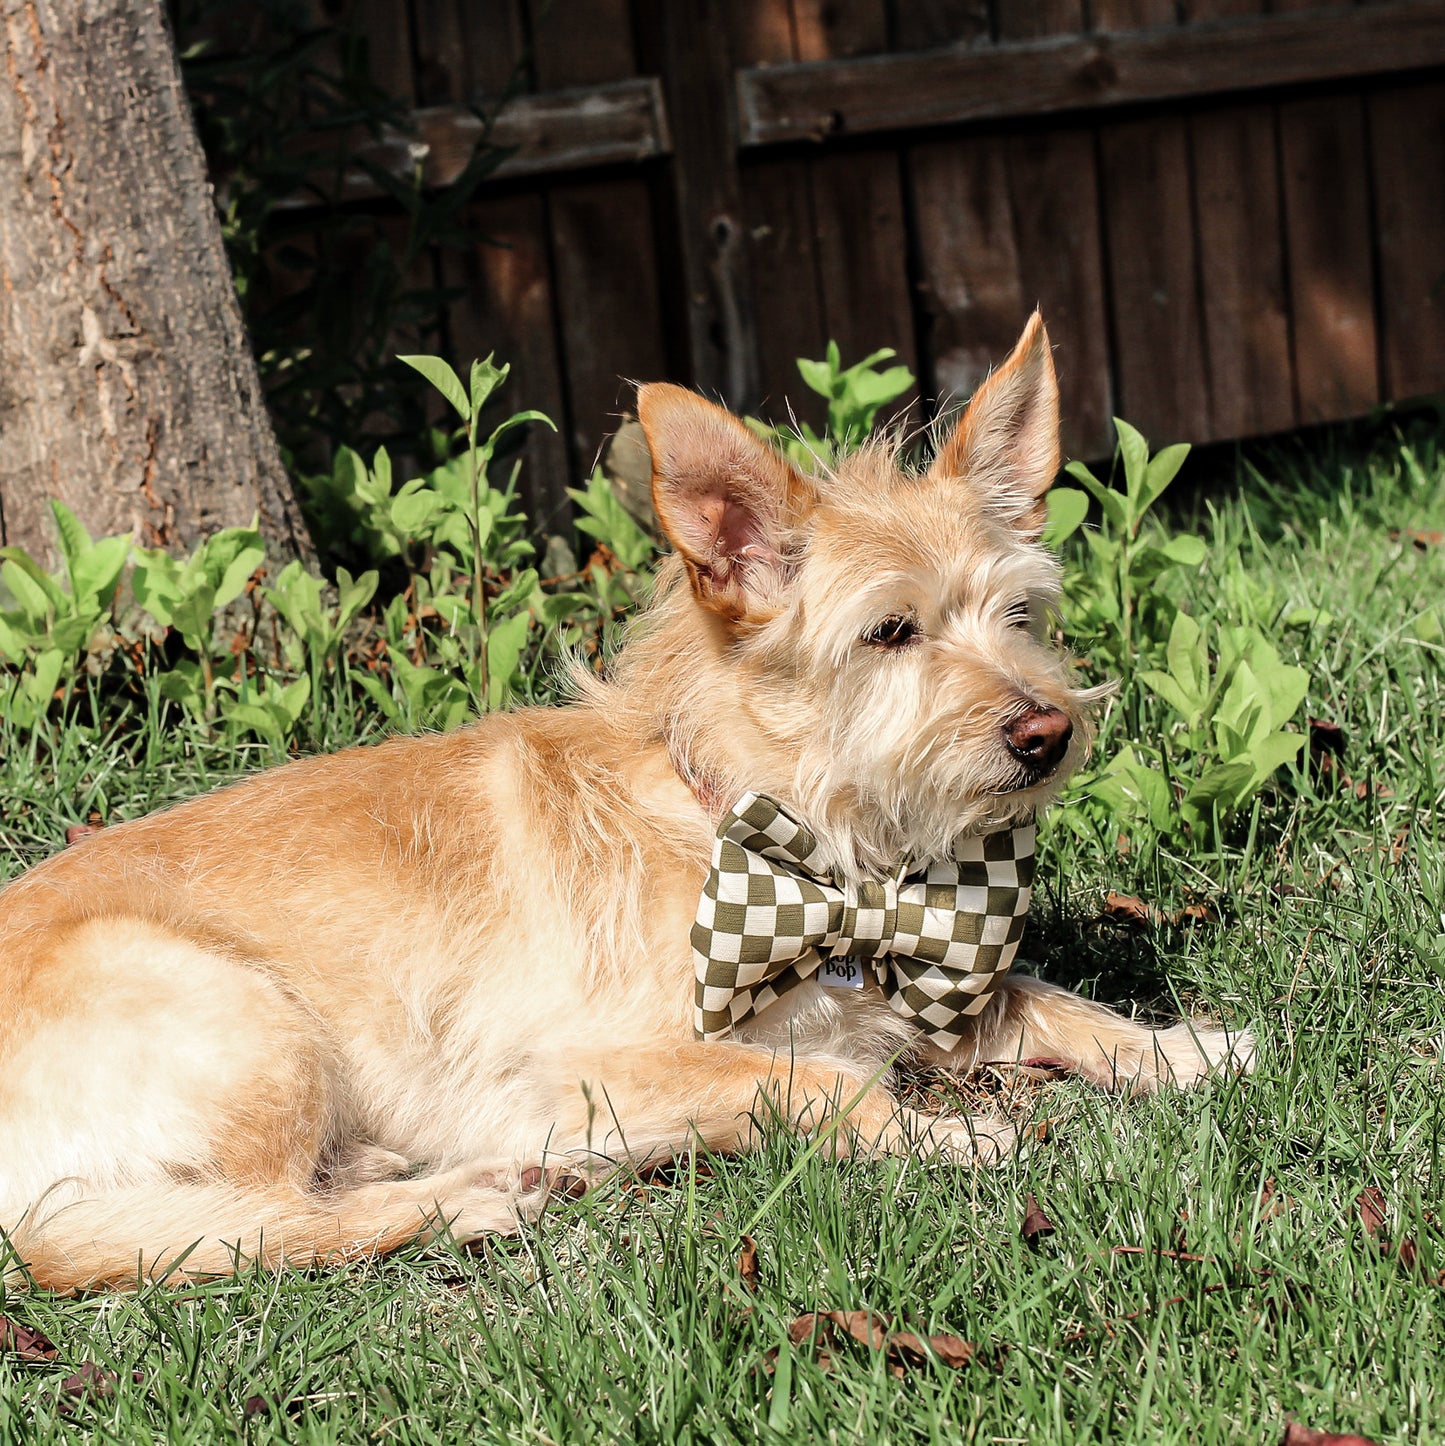 BIG giant dog cat bow tie olive green checkerboard puffy large sized dog accessory Bop Pop Pets rescue dog in park